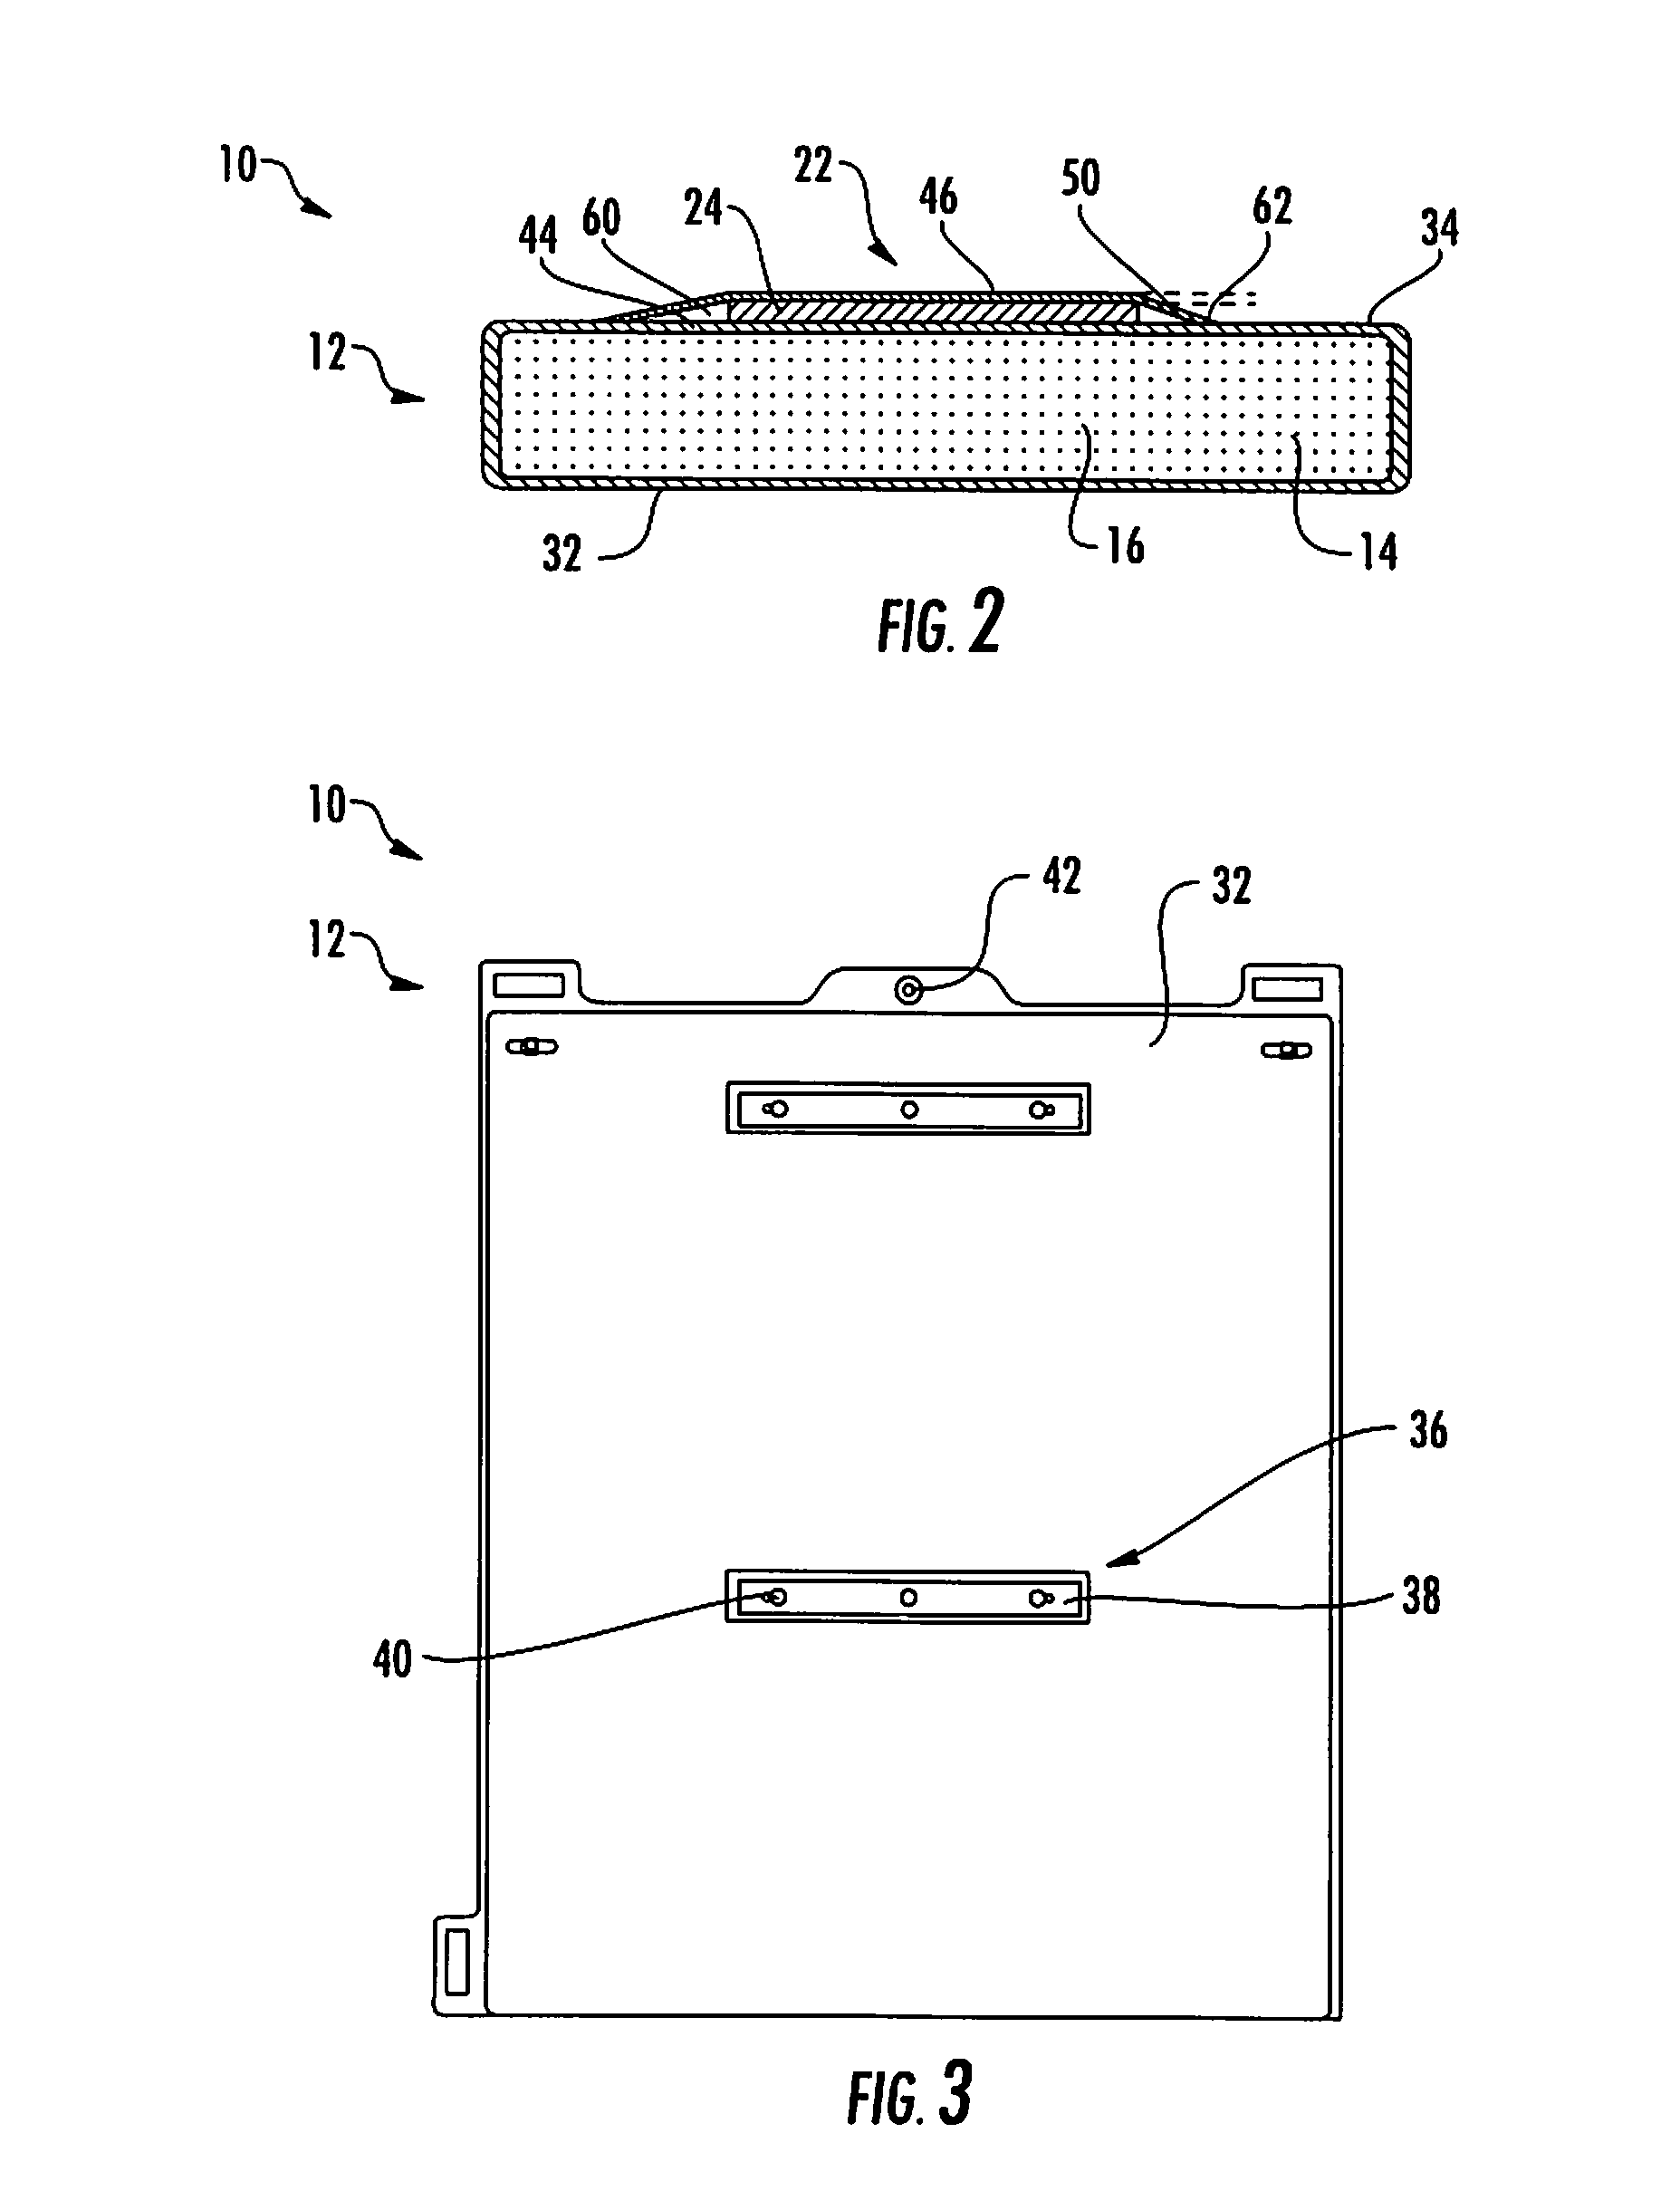 Radiotherapy patient immobilization device and method